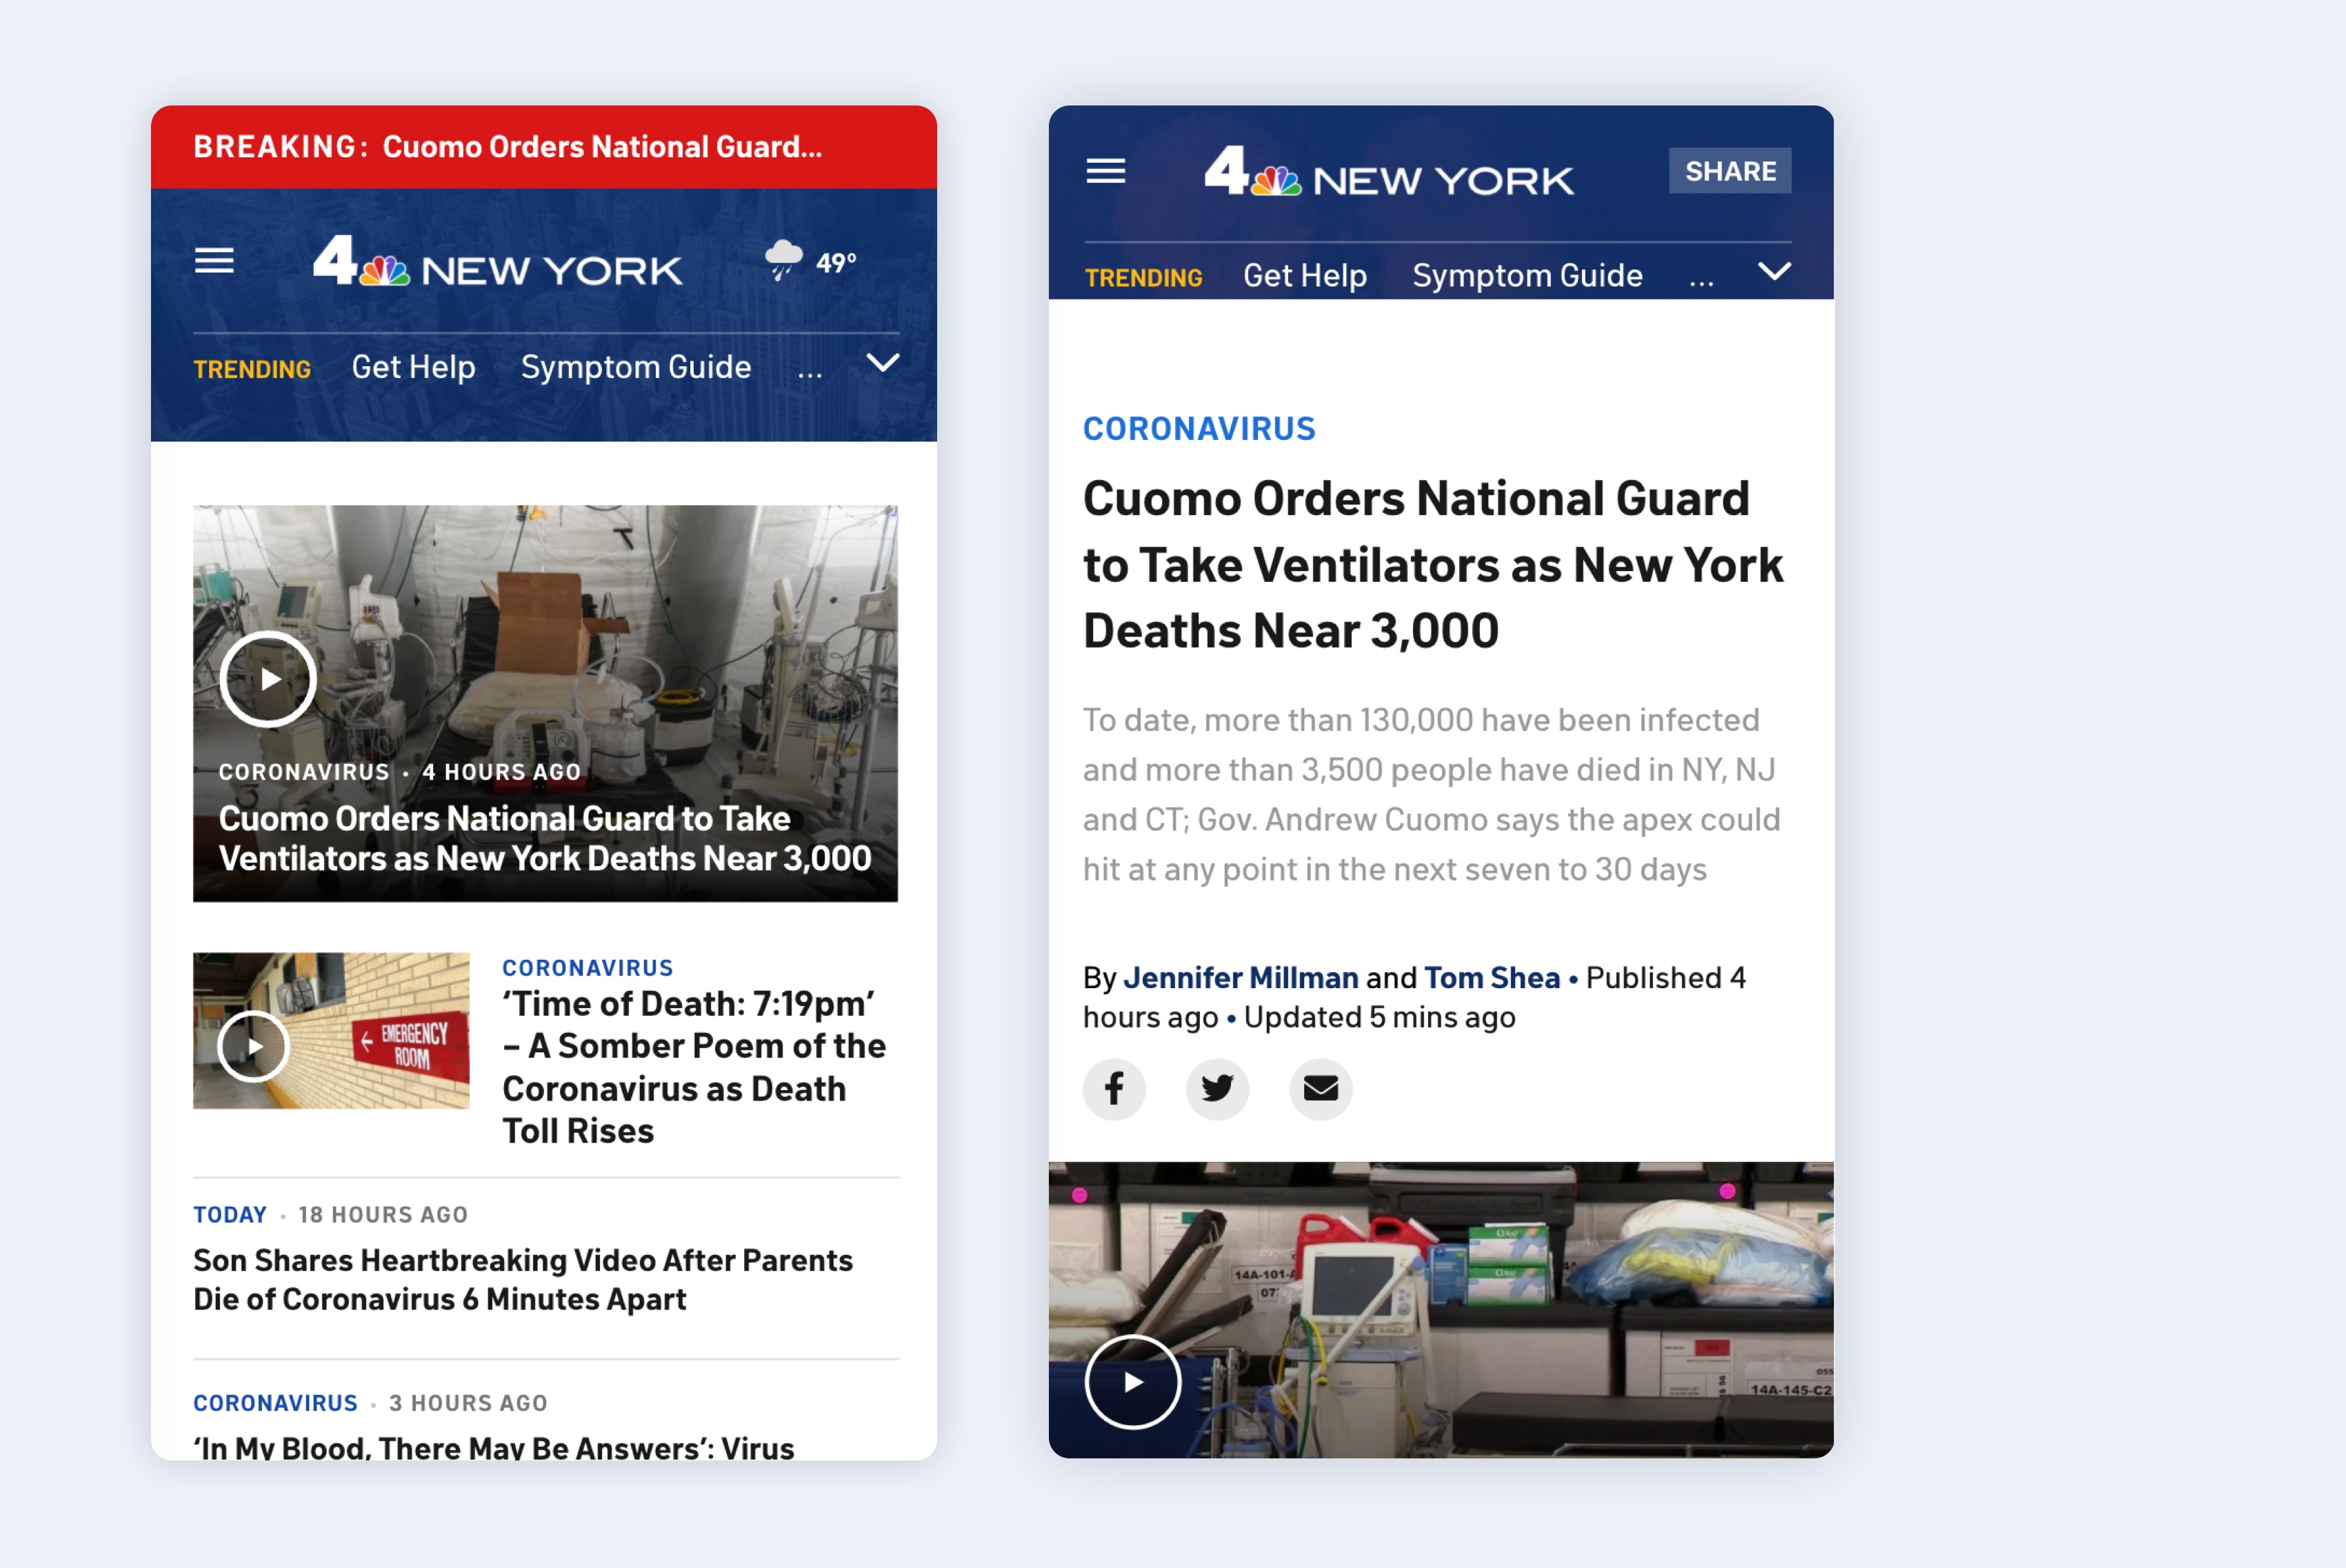 Mobile views of NBC 4 New York site with video thumbnails and bold headlines in a red and blue color scheme